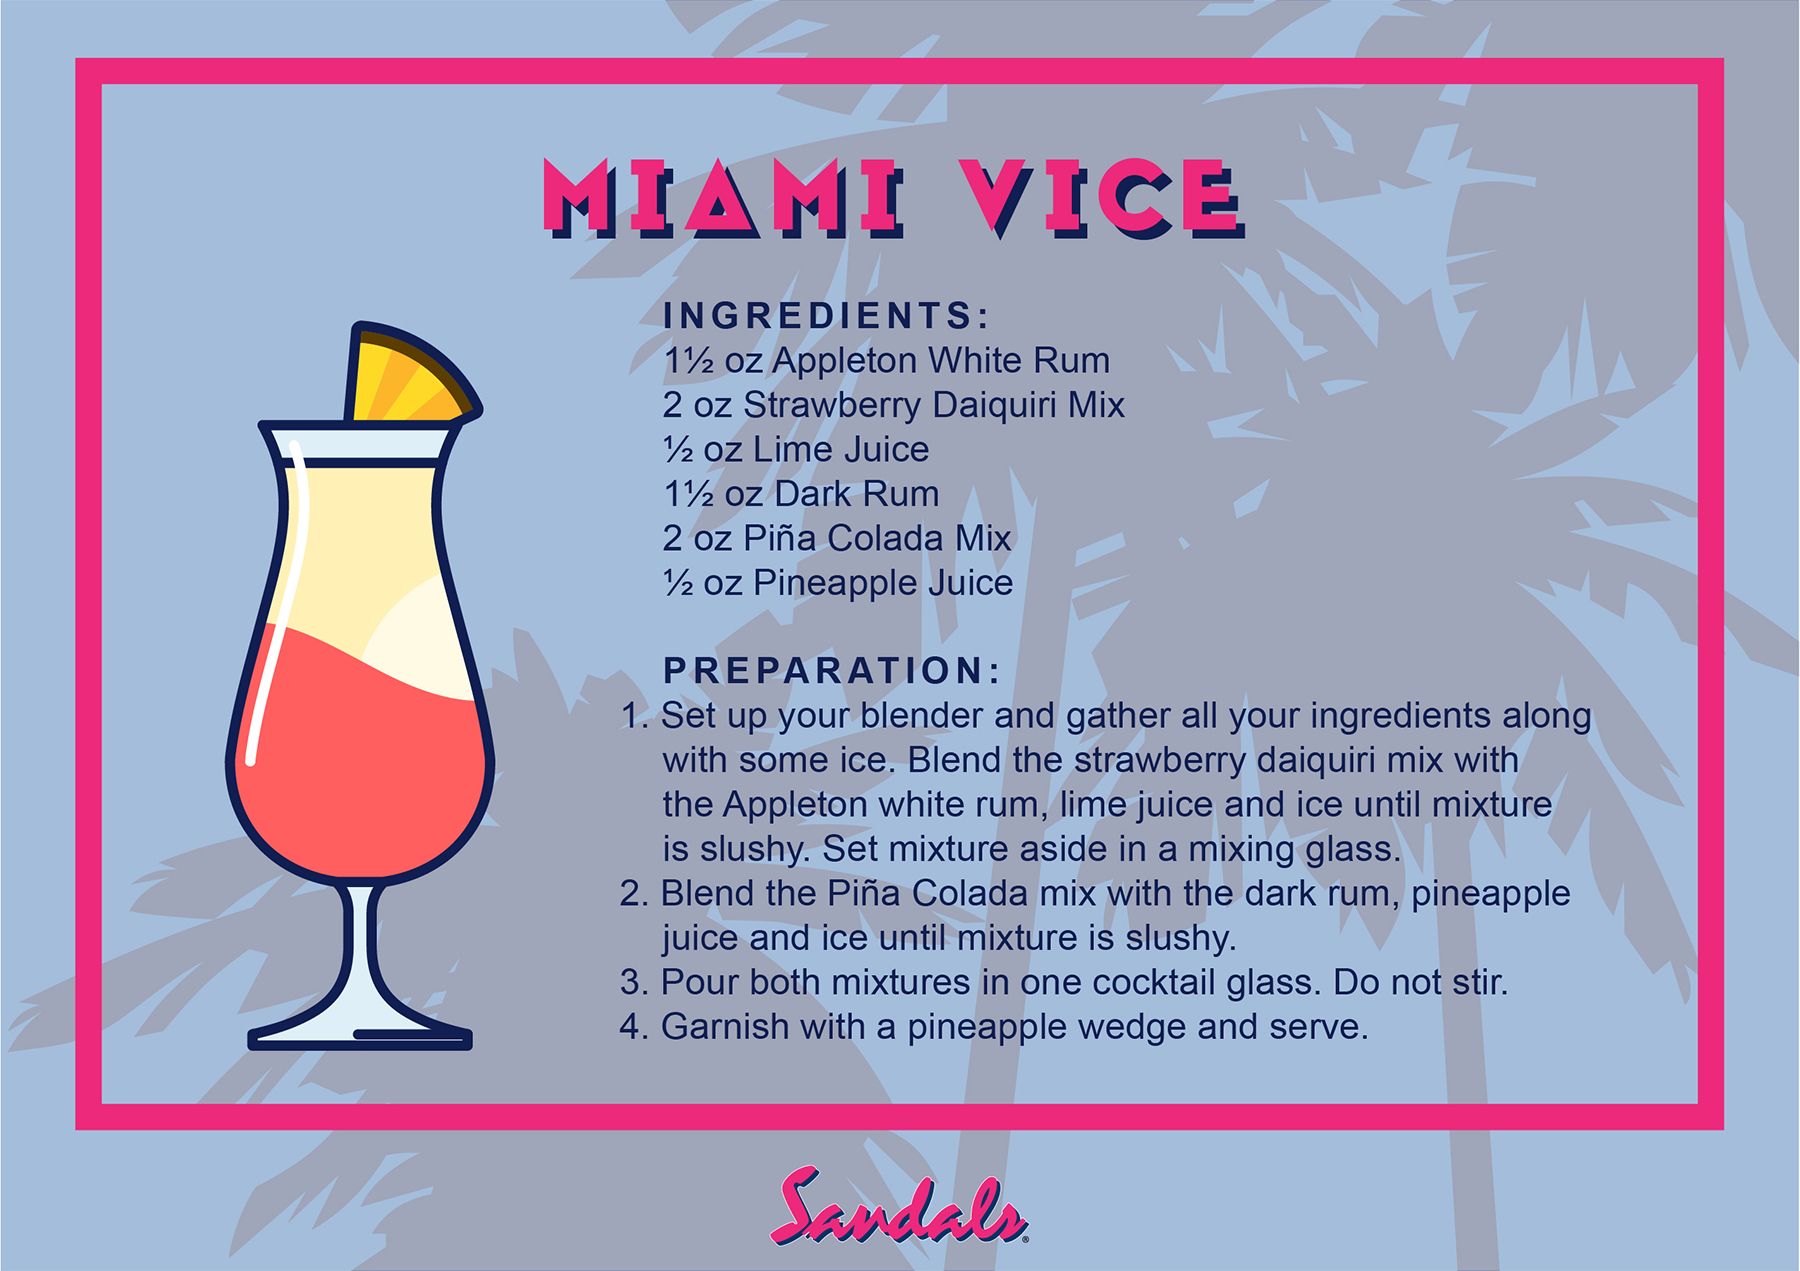 Sandals Cocktail Cards Small Miami Vice Post